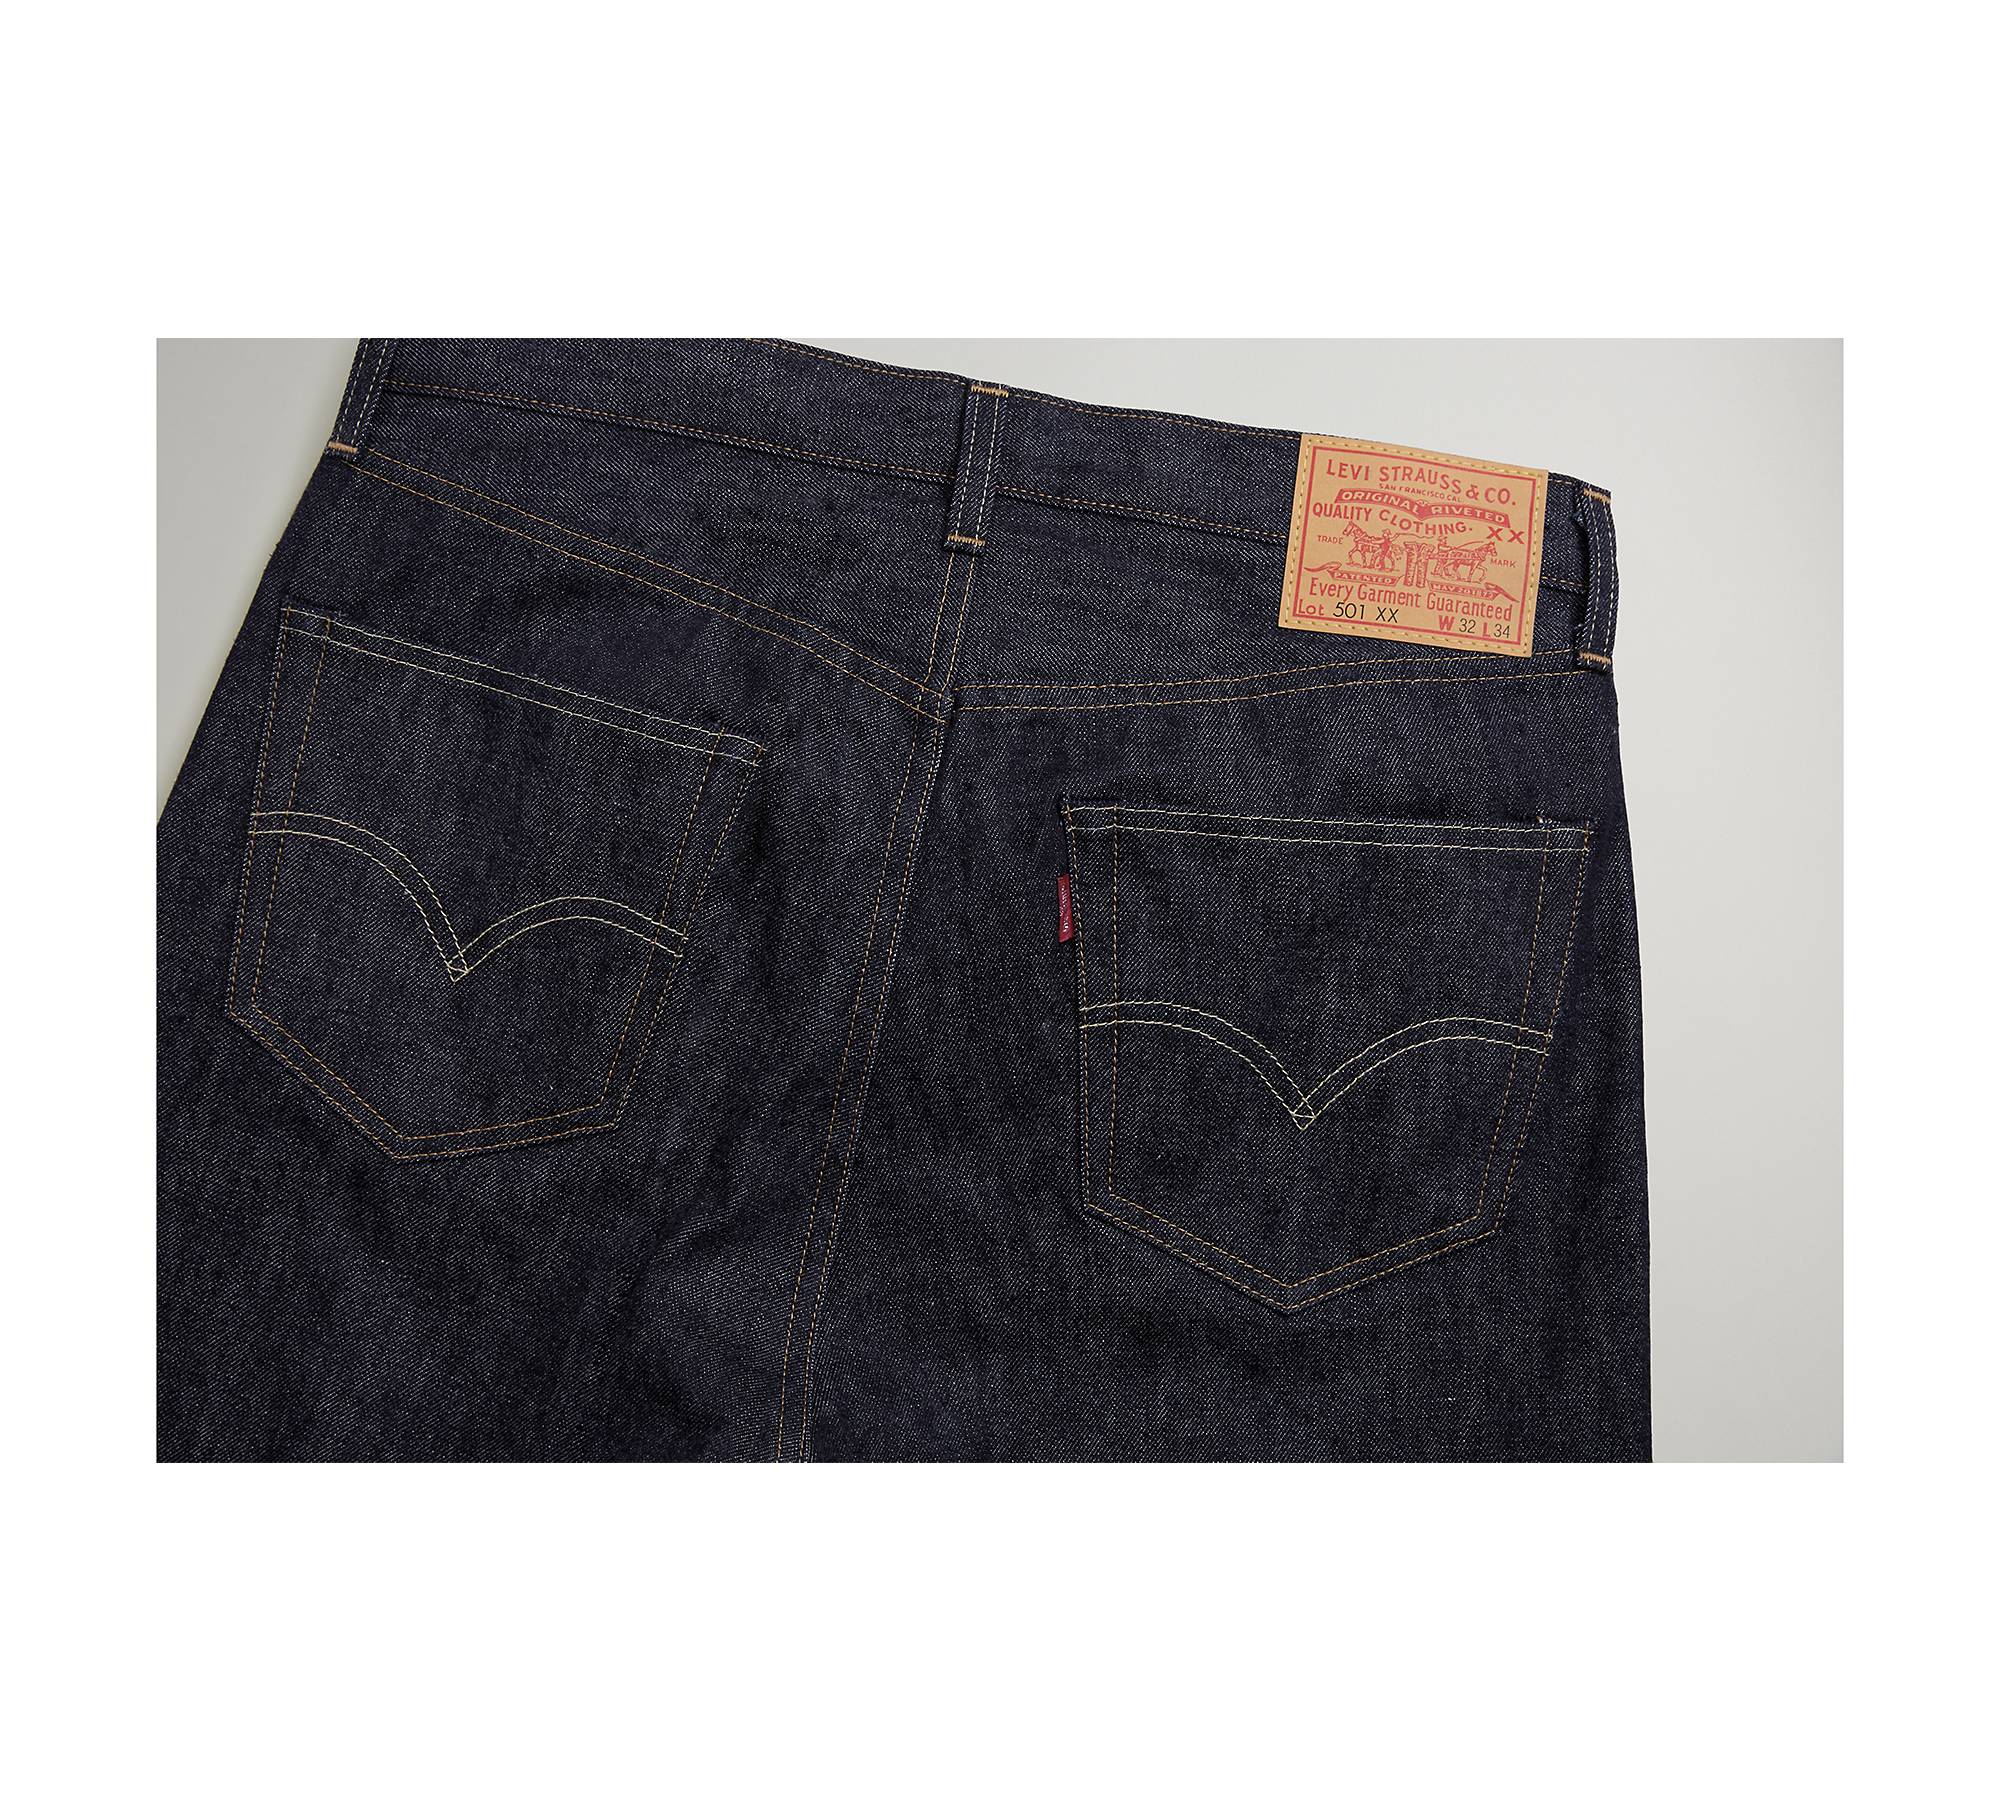 LEVIS VINTAGE CLOTHING LIMITED EDITION 1873 XX OVERALL